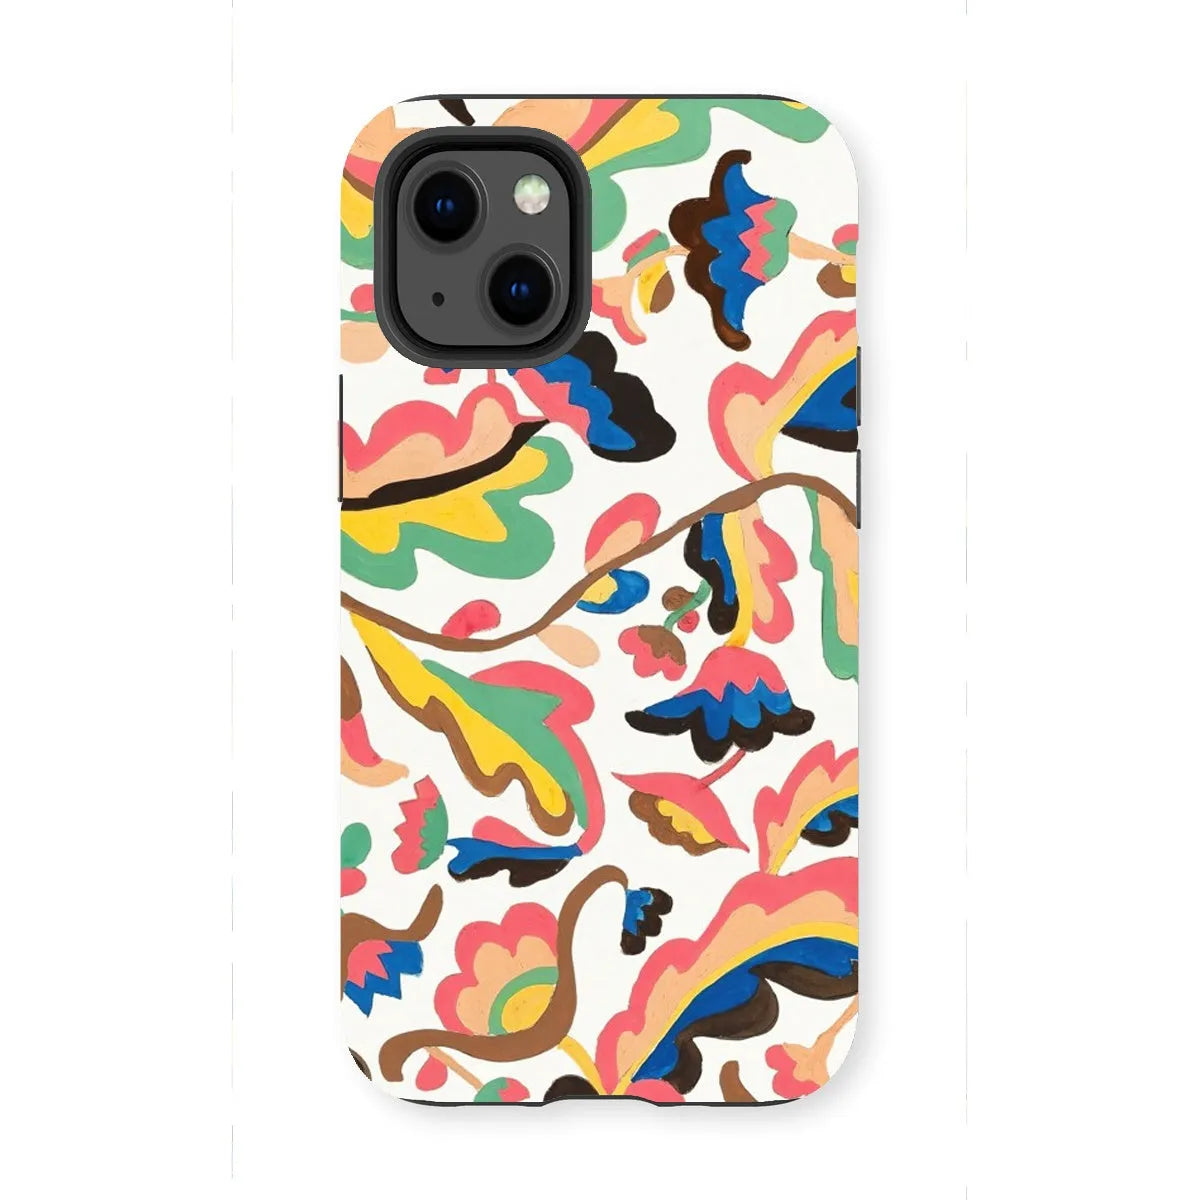 Colcha Floral Aesthetic Pattern Phone Case - Etna Wiswall - Iphone 13 Mini / Matte - Mobile Phone Cases - Aesthetic Art